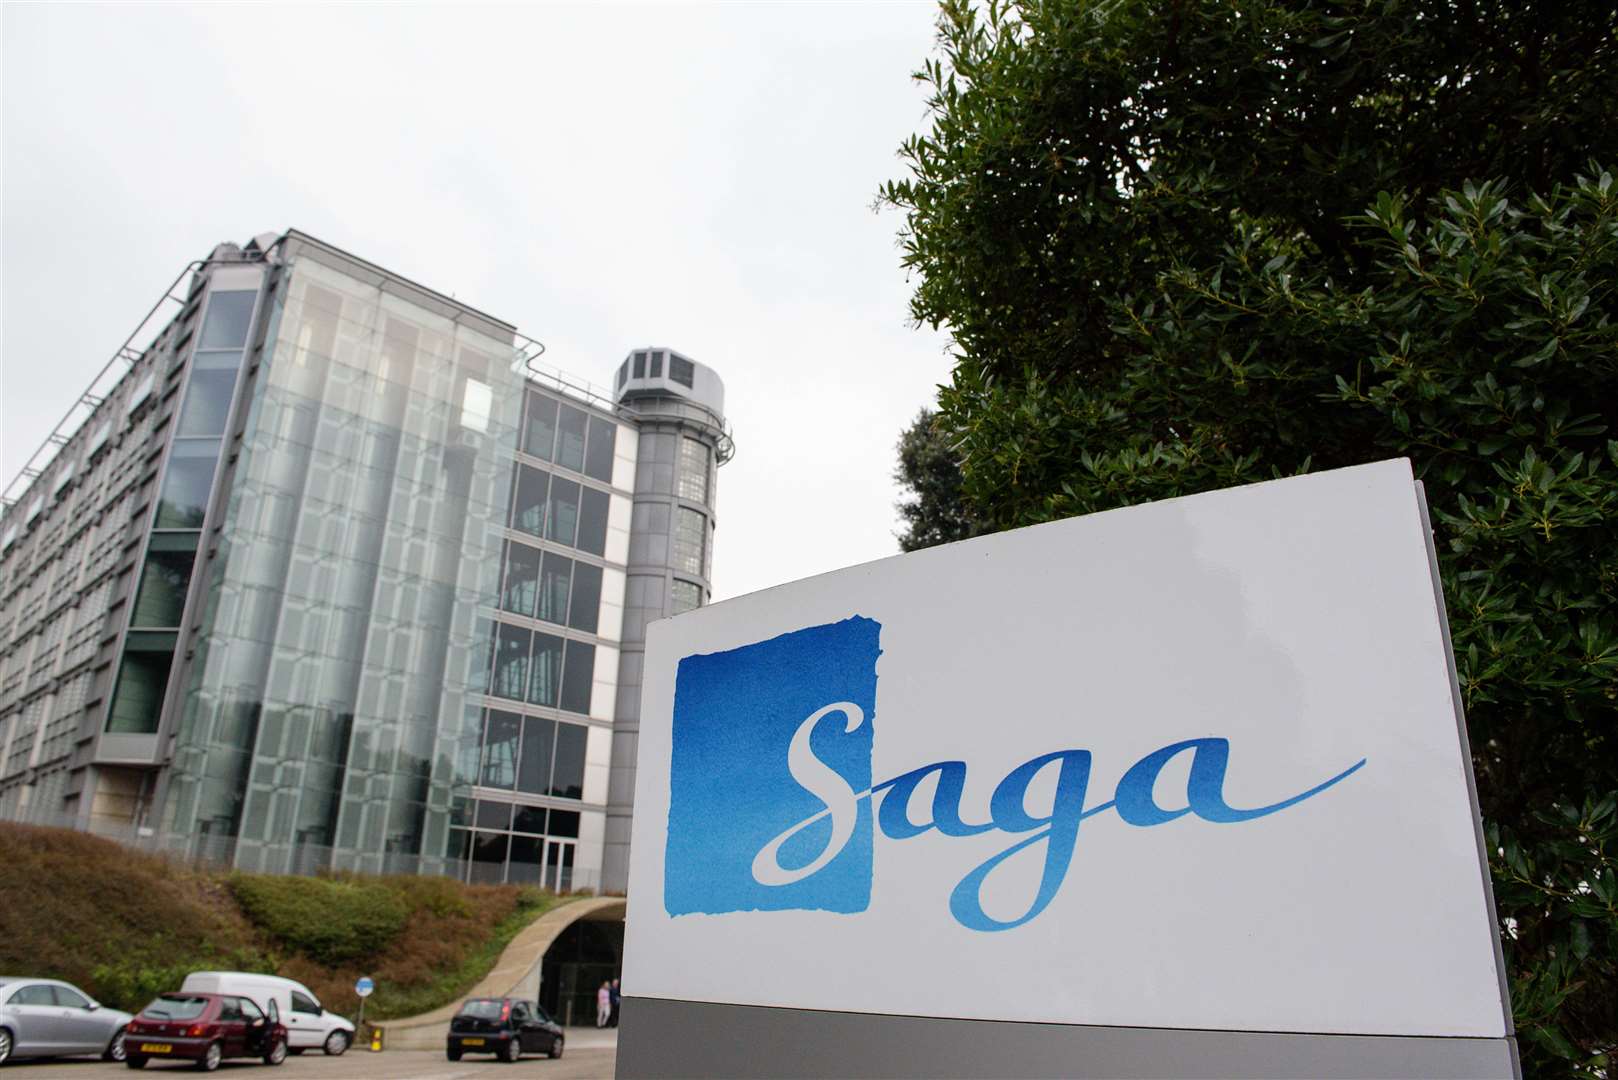 Saga has offices in Folkestone and Thanet